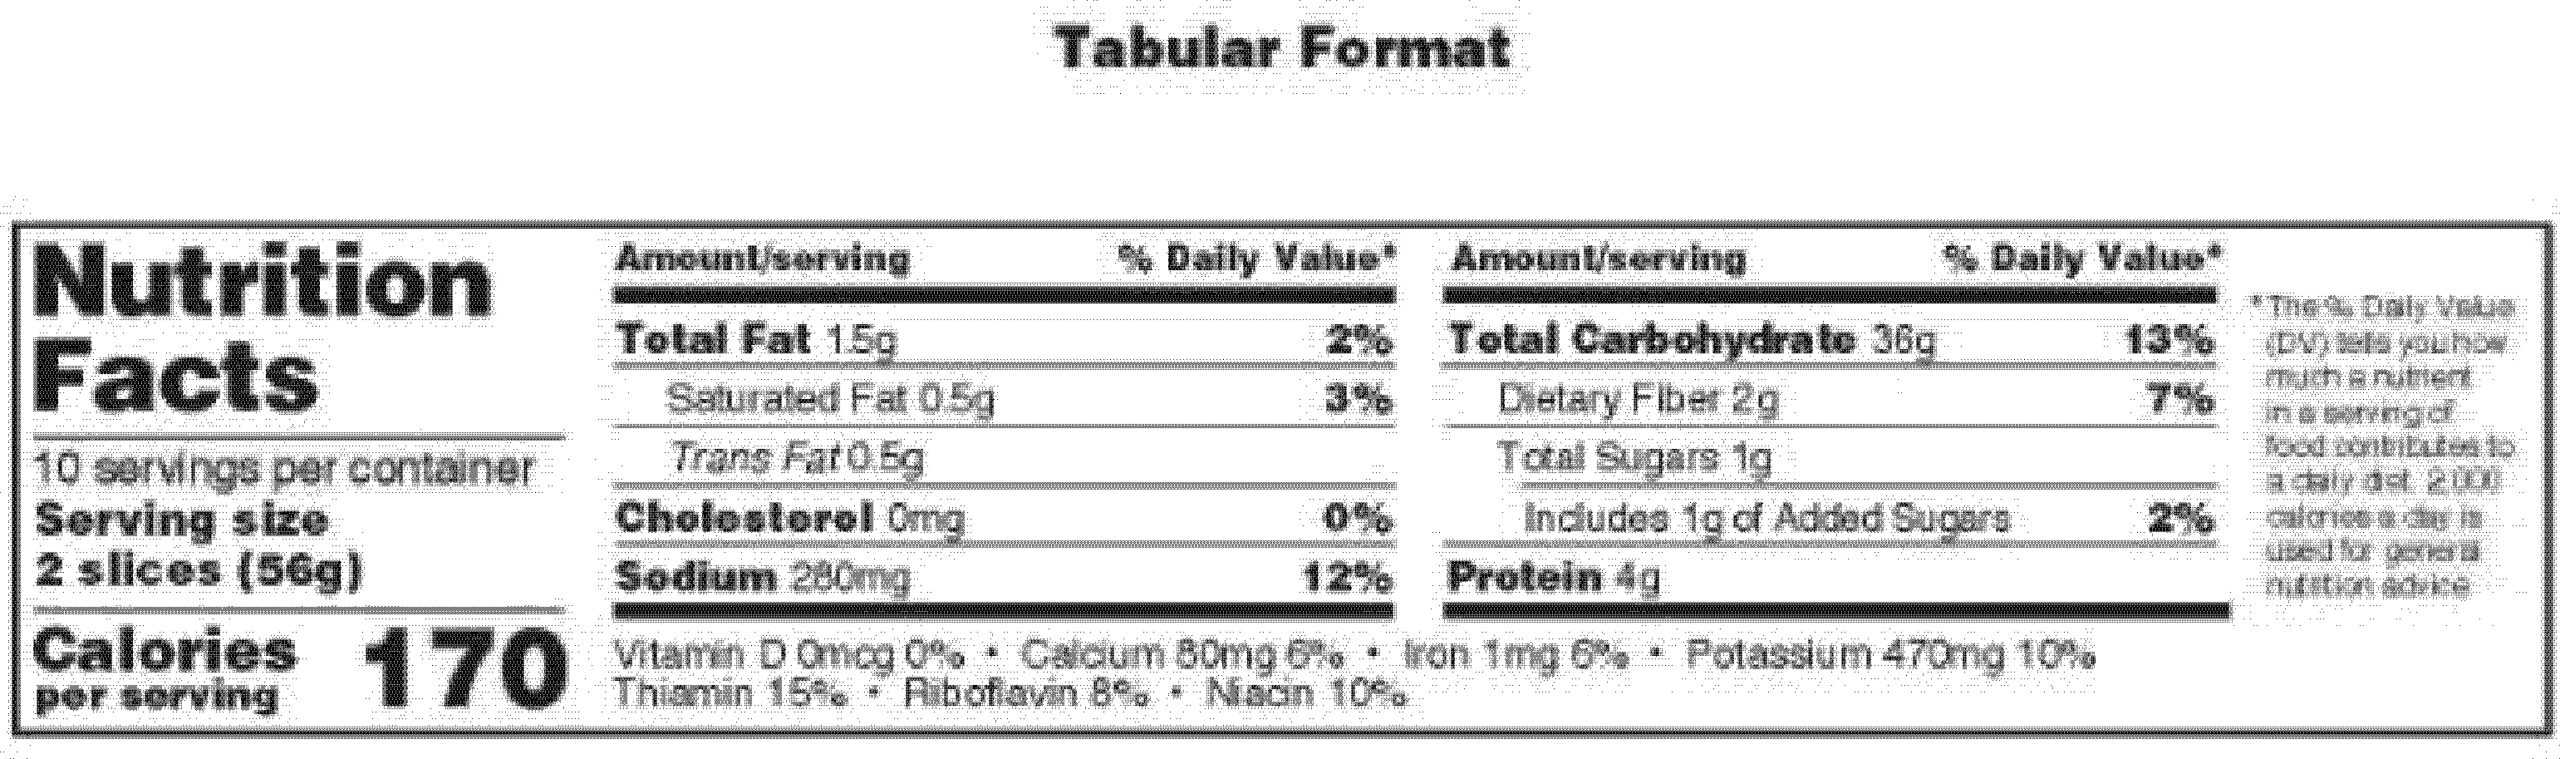 Supplement Facts Label Template Fdating. Free Nutrition For Nutrition Label Template Word